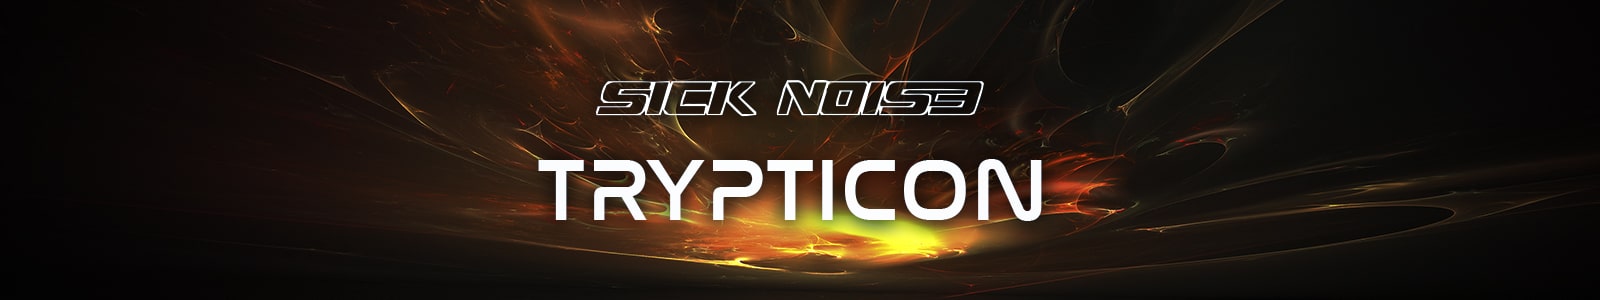 TRYPTICON by Sick Noise Instruments